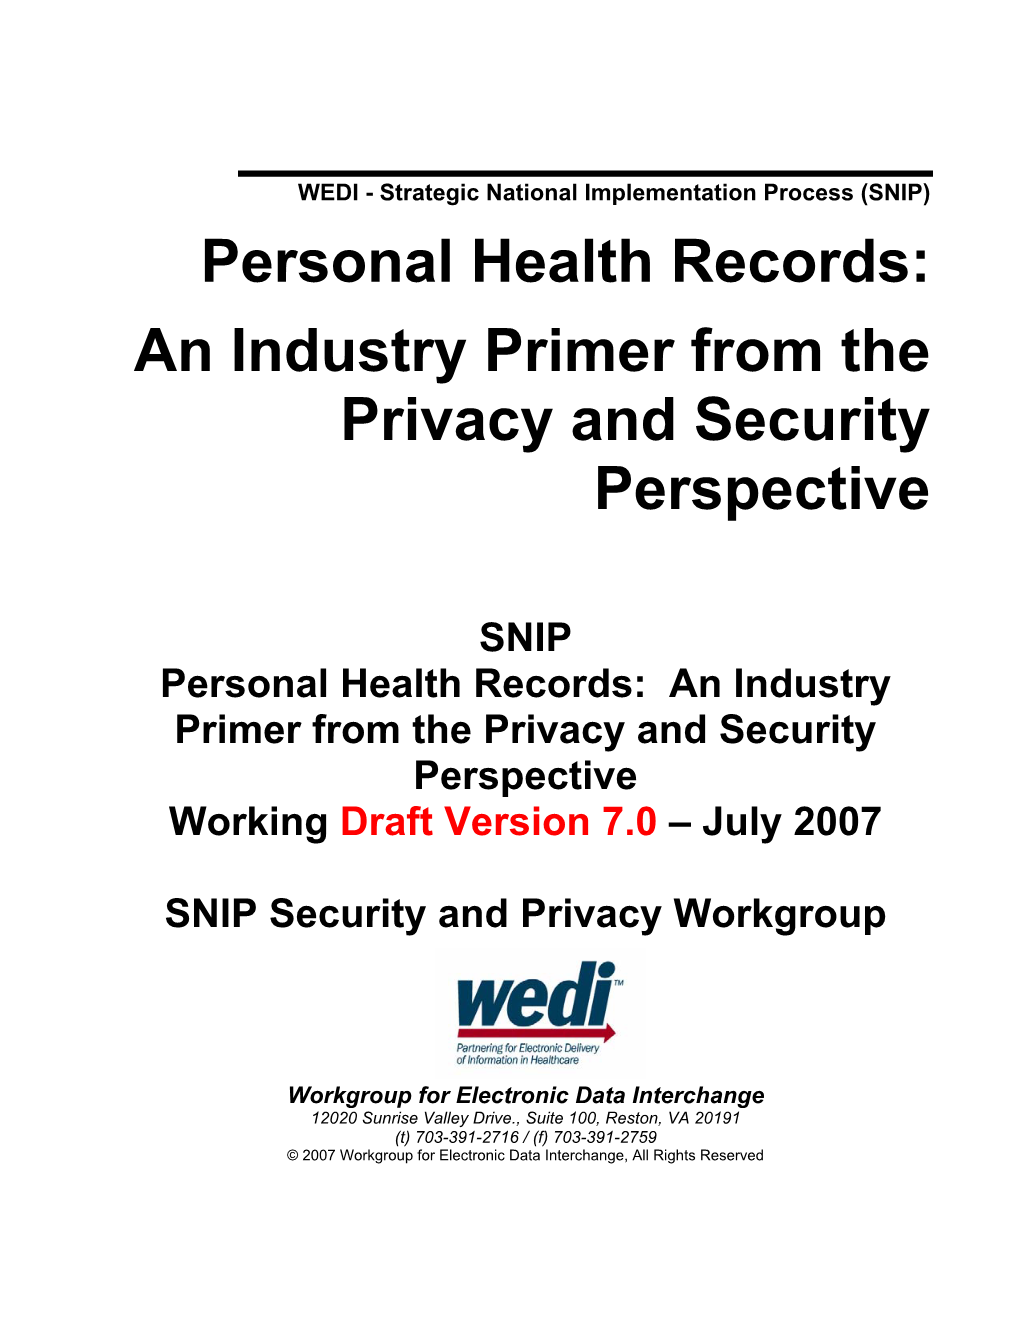 Personal Health Records: an Industry Primer from the Privacy and Security Perspective